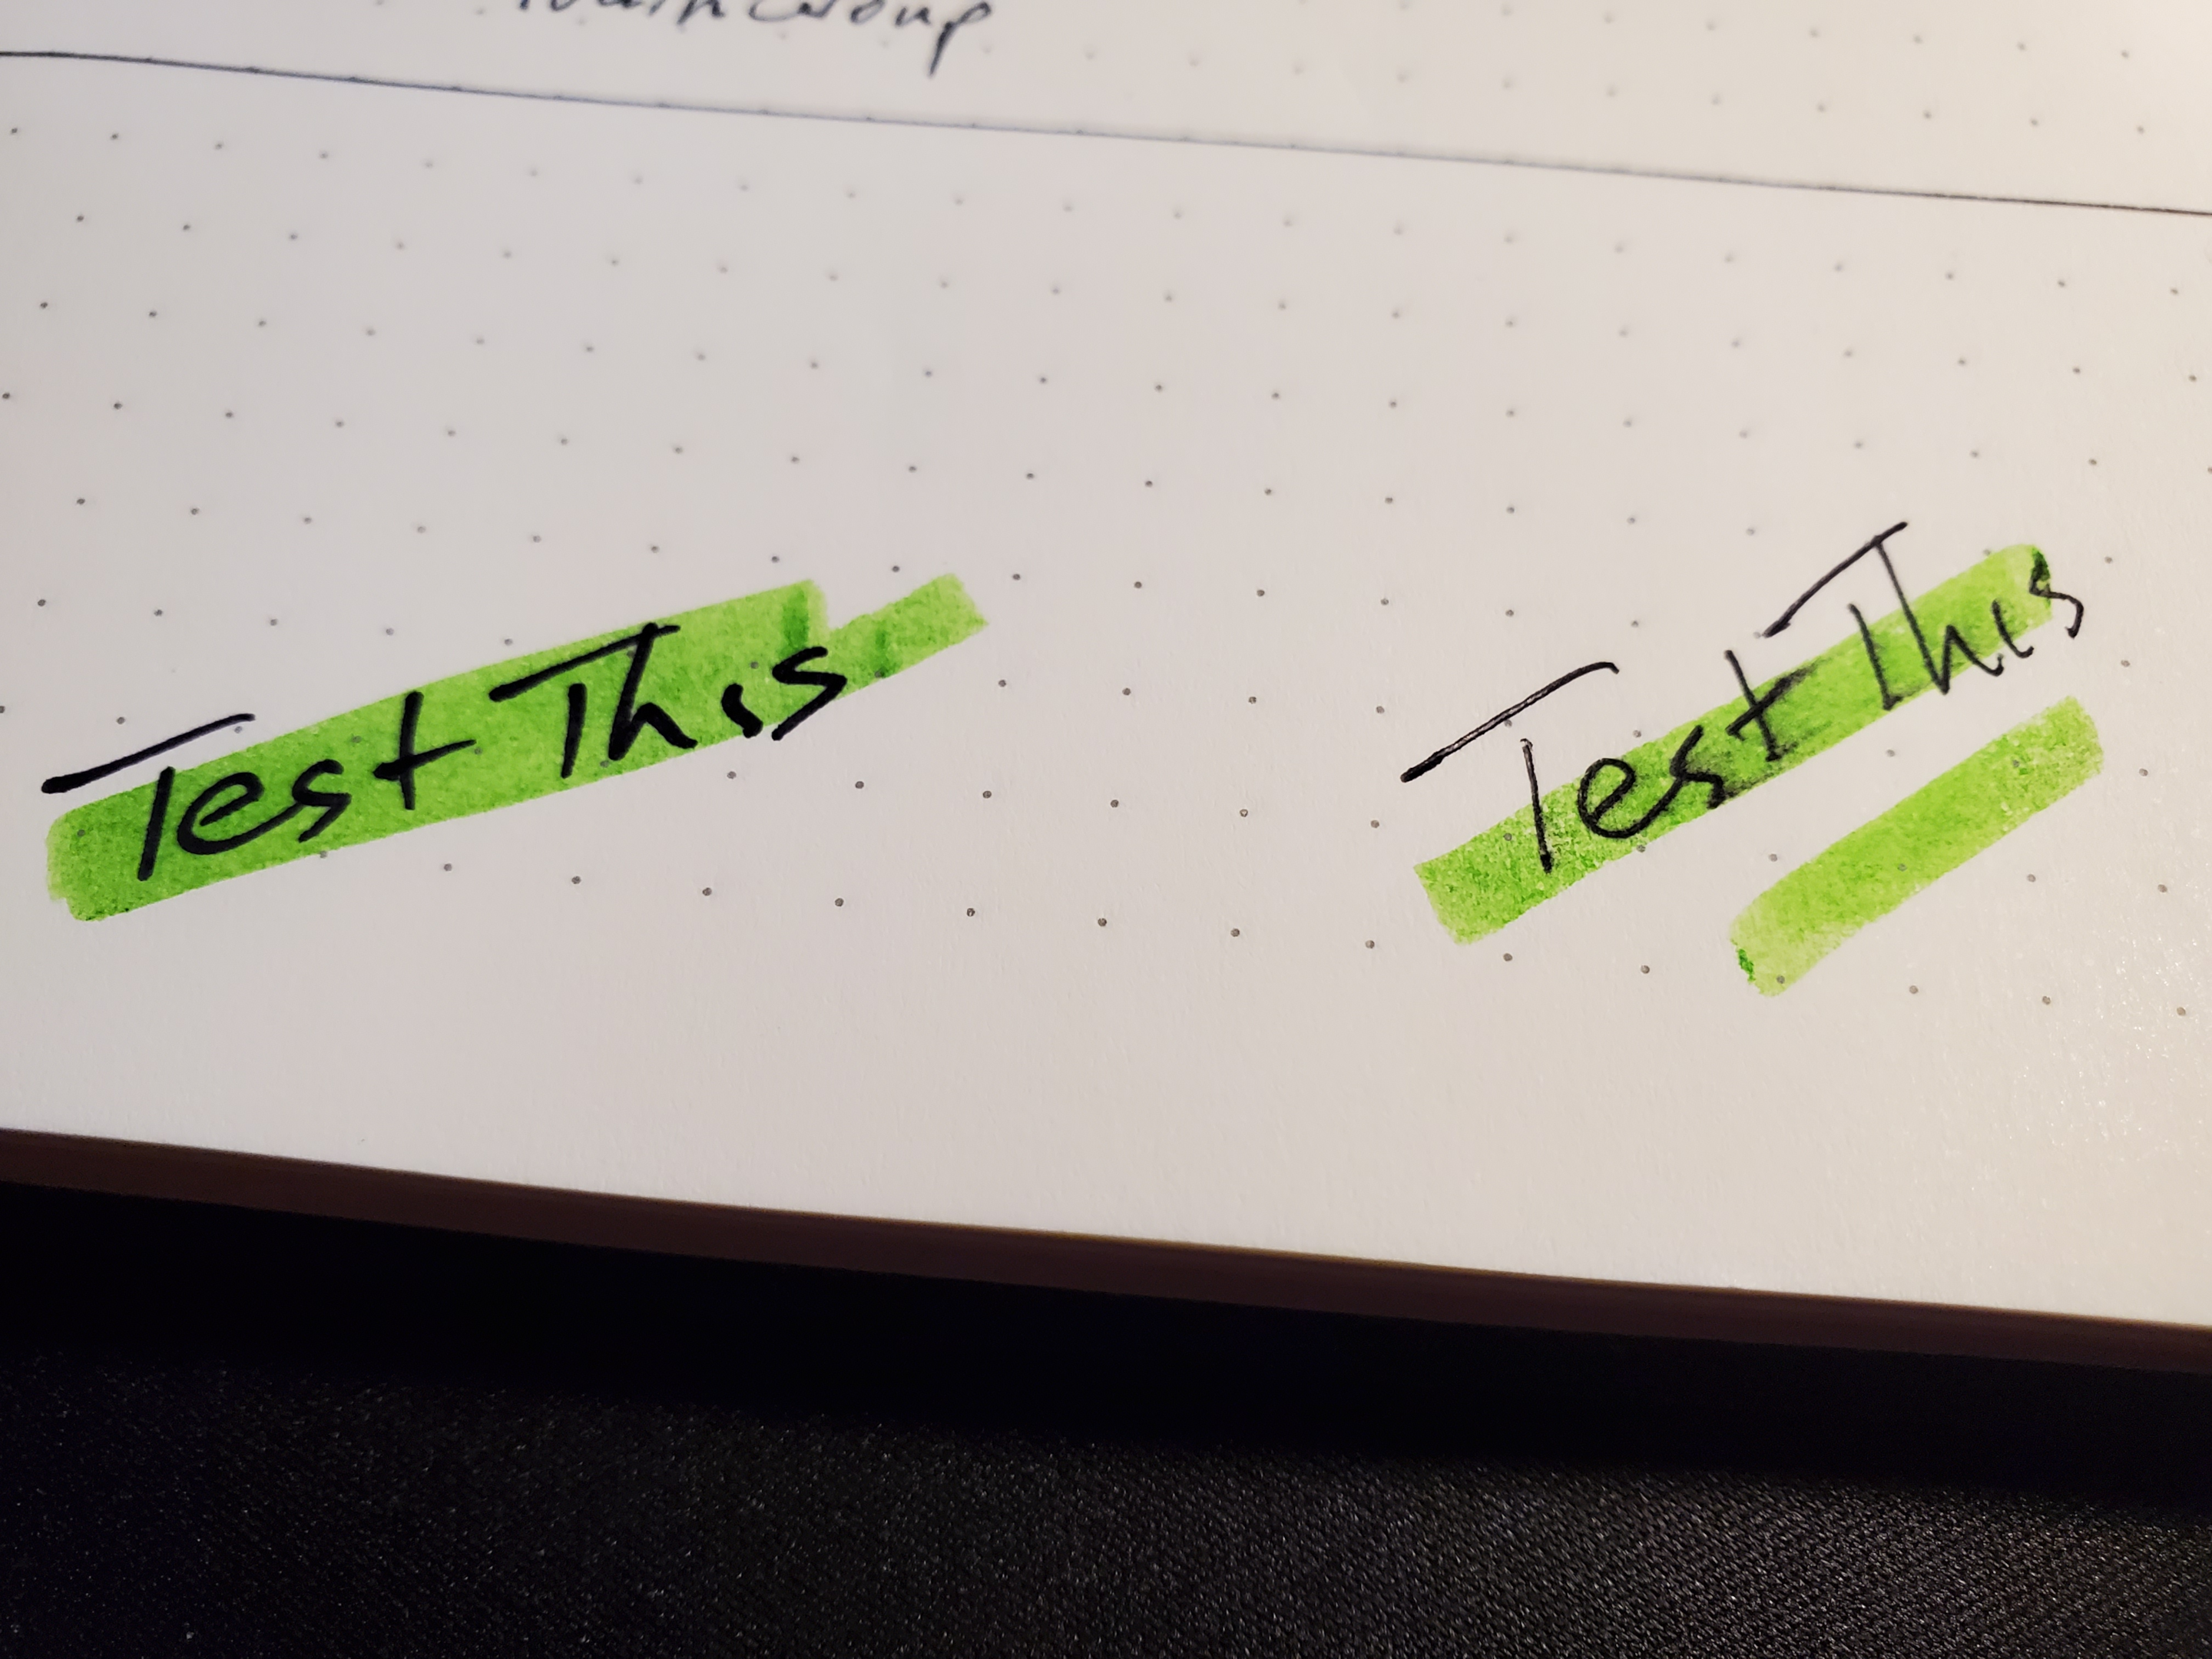 Comparing "Test This" written by permanent ink pen and a gel pen to show ink bleed from highlighter in bullet journal